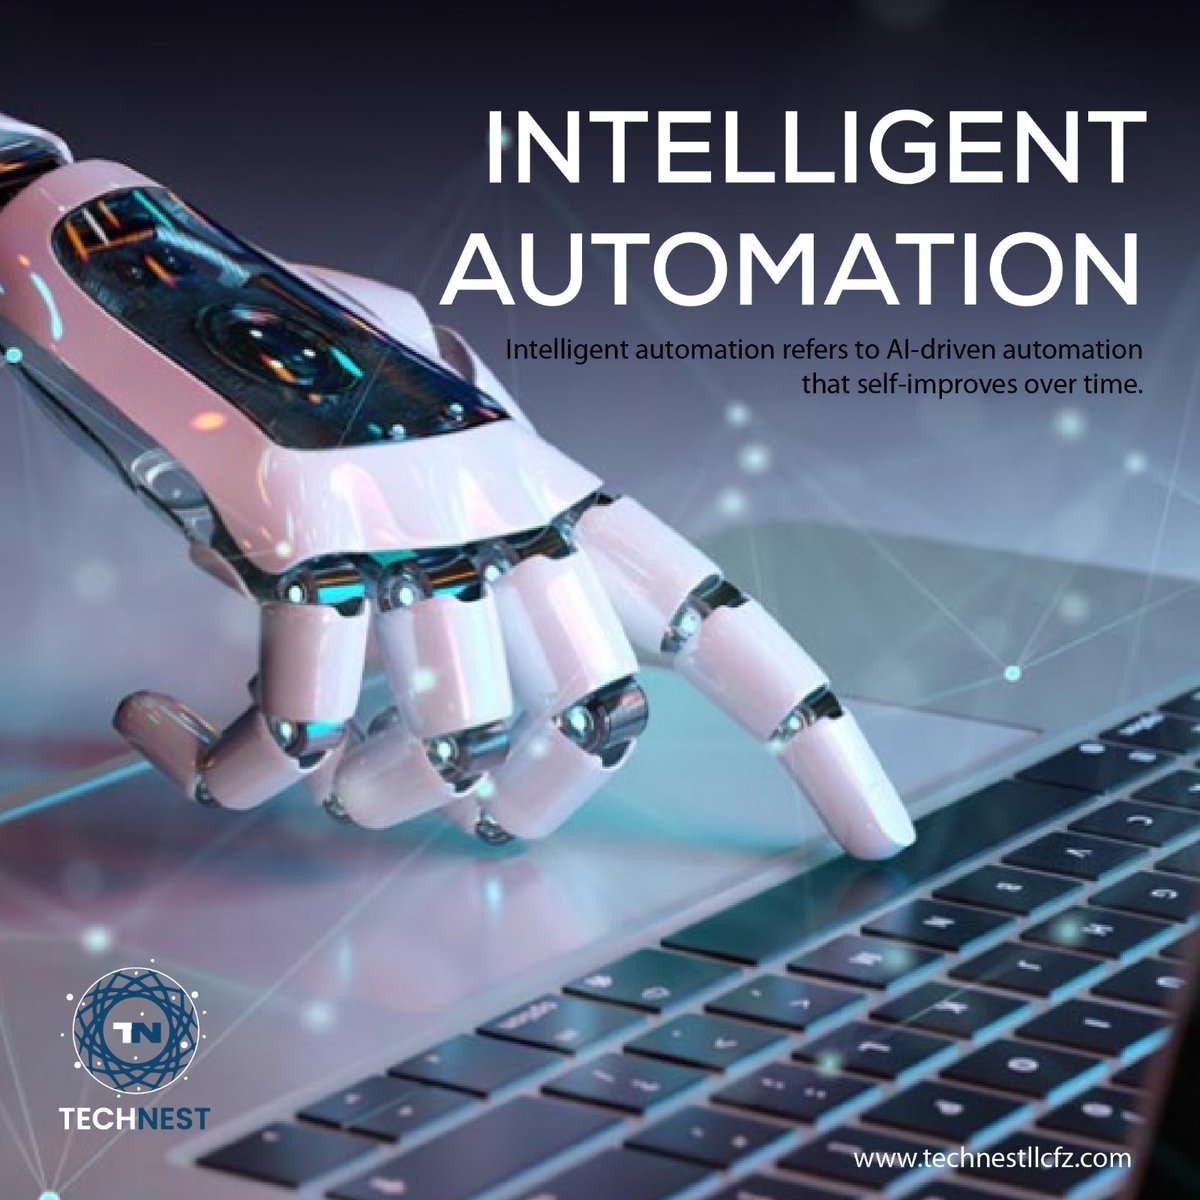 Experience the power of intelligent automation, revolutionizing efficiency and innovation in your business. Let's automate success! 🔧💡
.
.
#intelligentautomation #technestllcfz #innovation